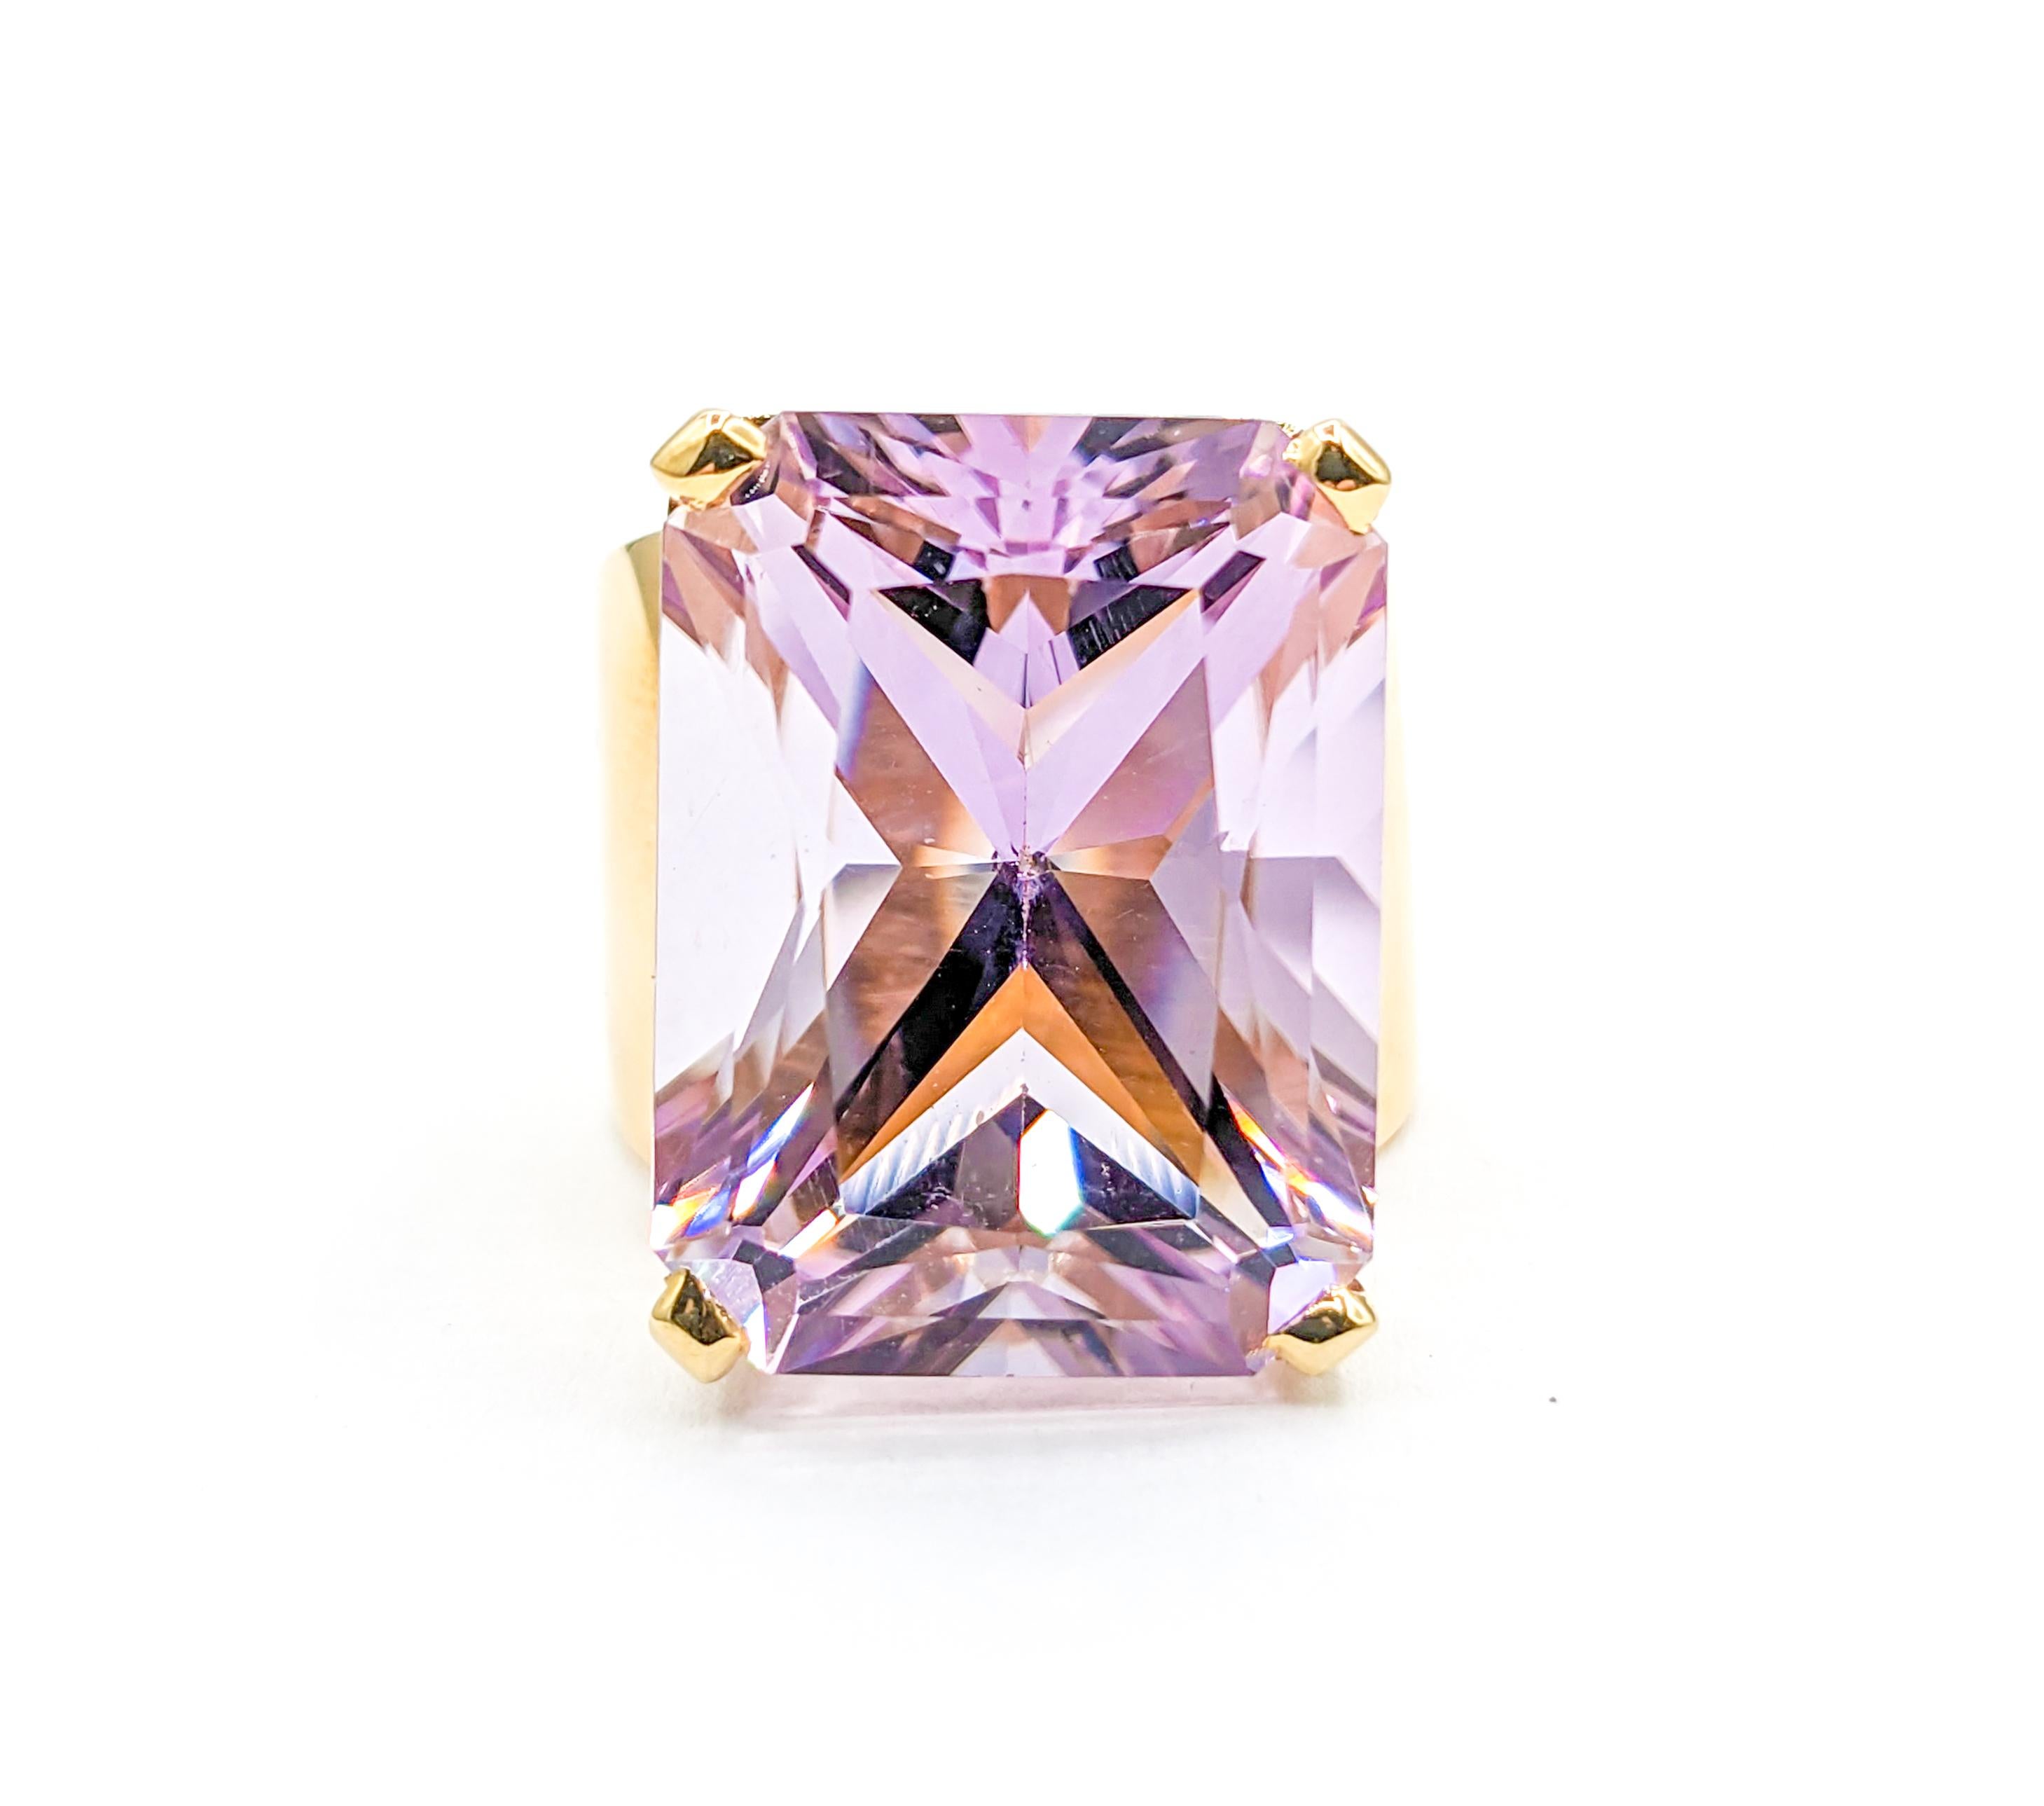 Vintage Light Purple Amethyst Cocktail Ring in Gold

Presenting a striking amethyst statement ring crafted in 14K yellow gold. This captivating ring features a prominent 20x15mm amethyst. The amethyst stands out against the buttery gold with its